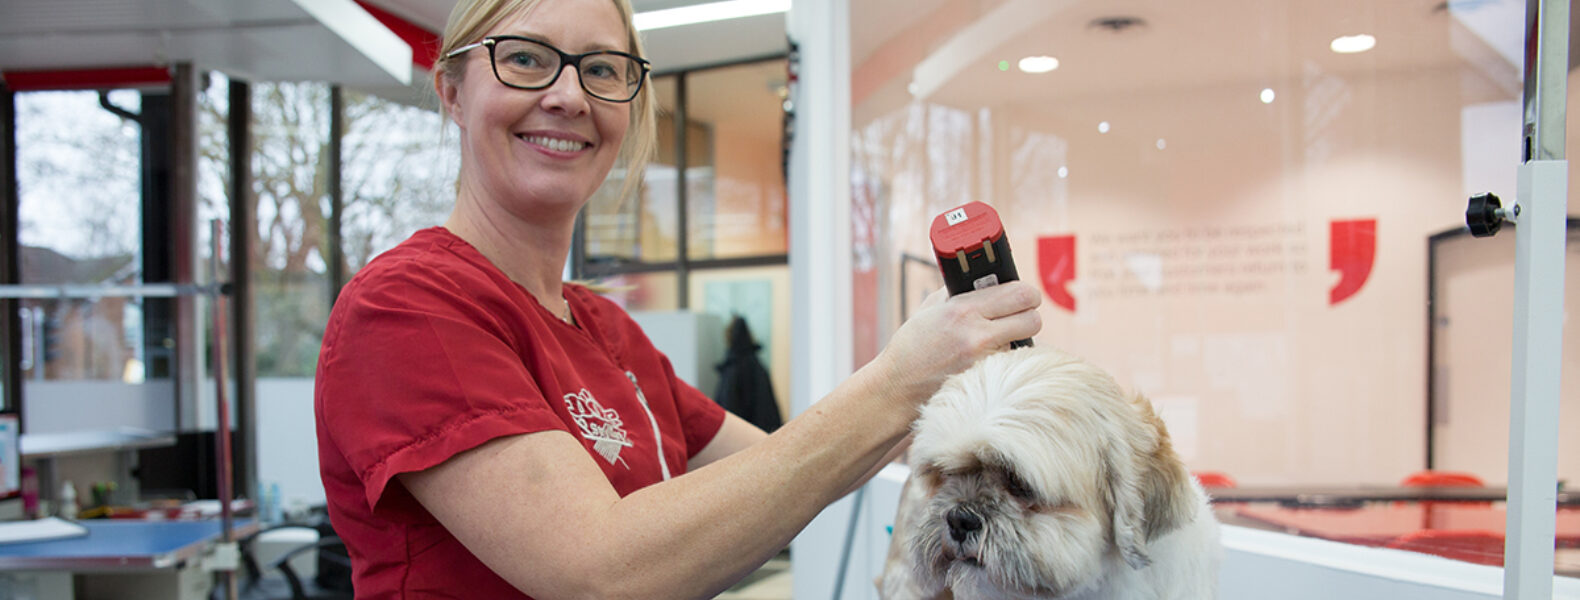 A guide into dog grooming insurance for your business